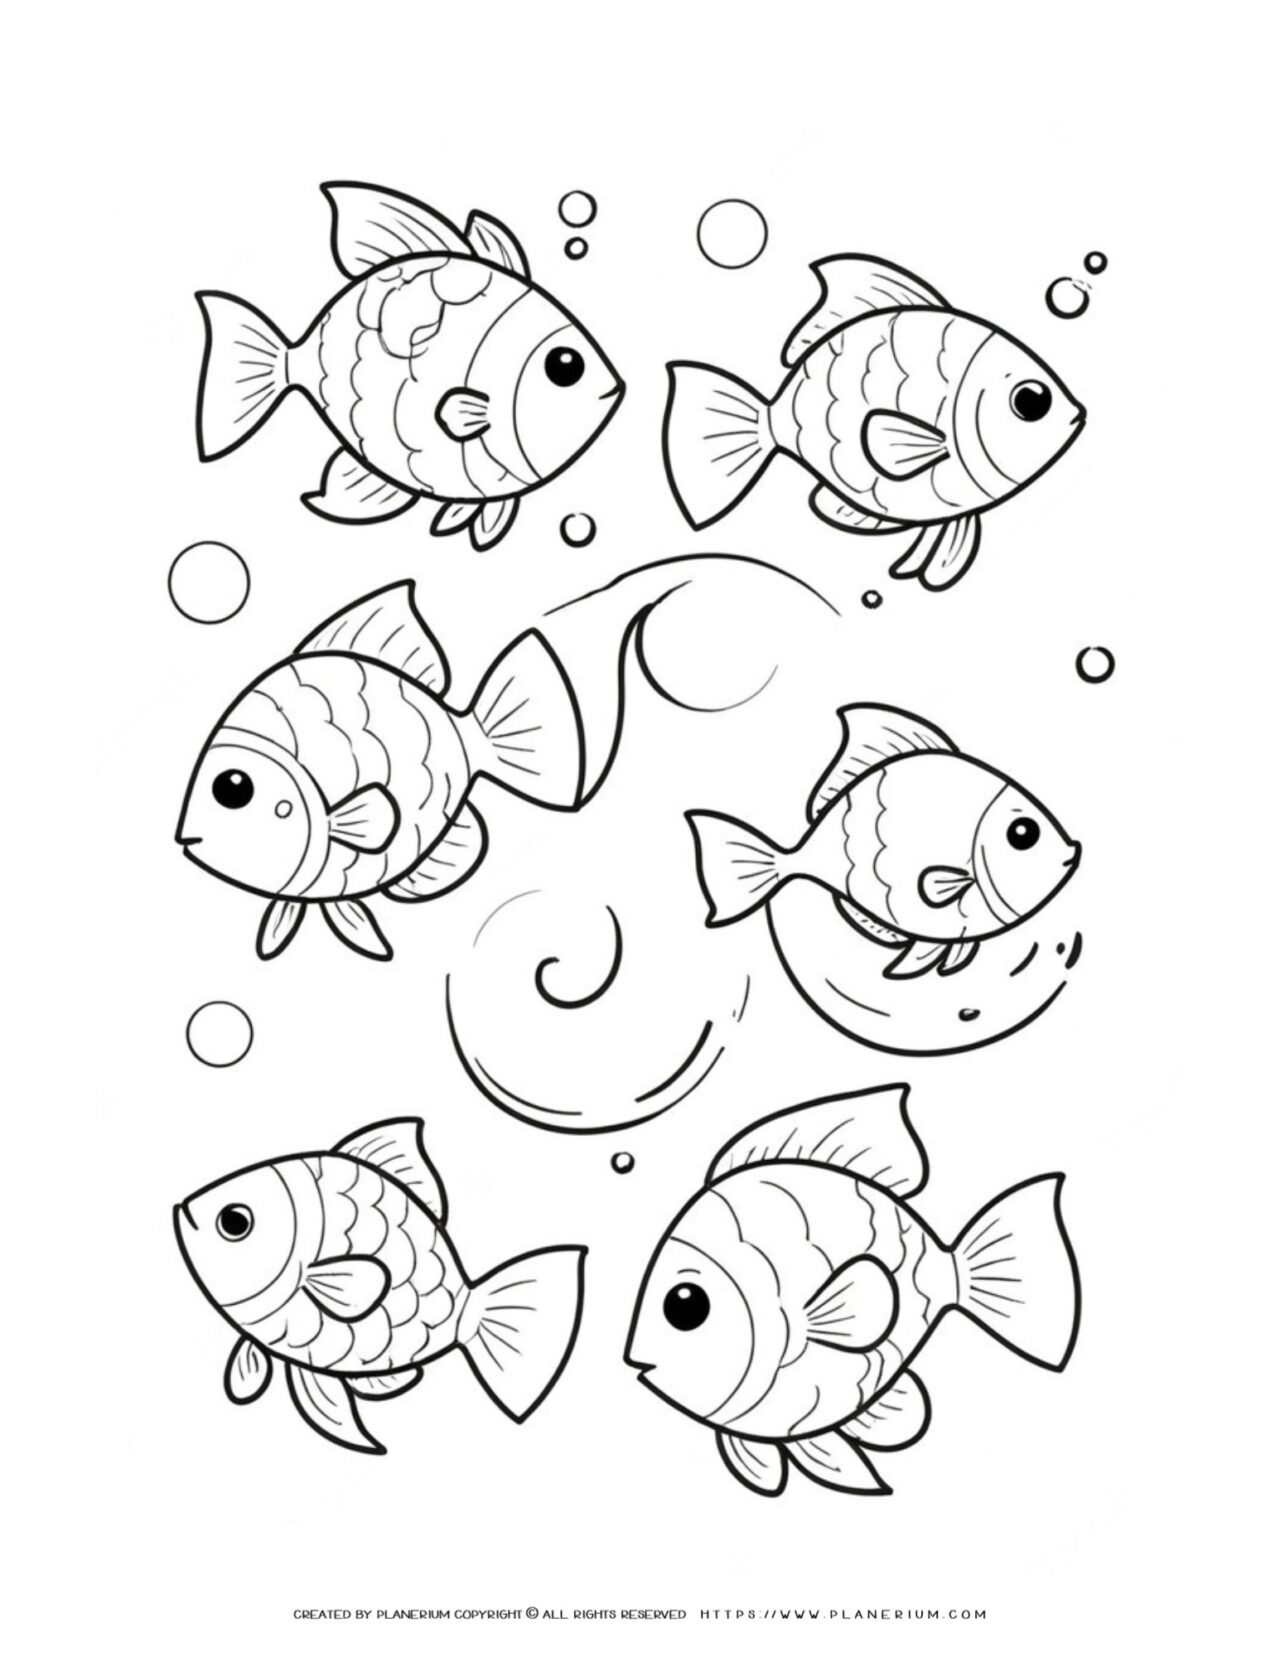 Black-and-white-coloring-page-with-fish